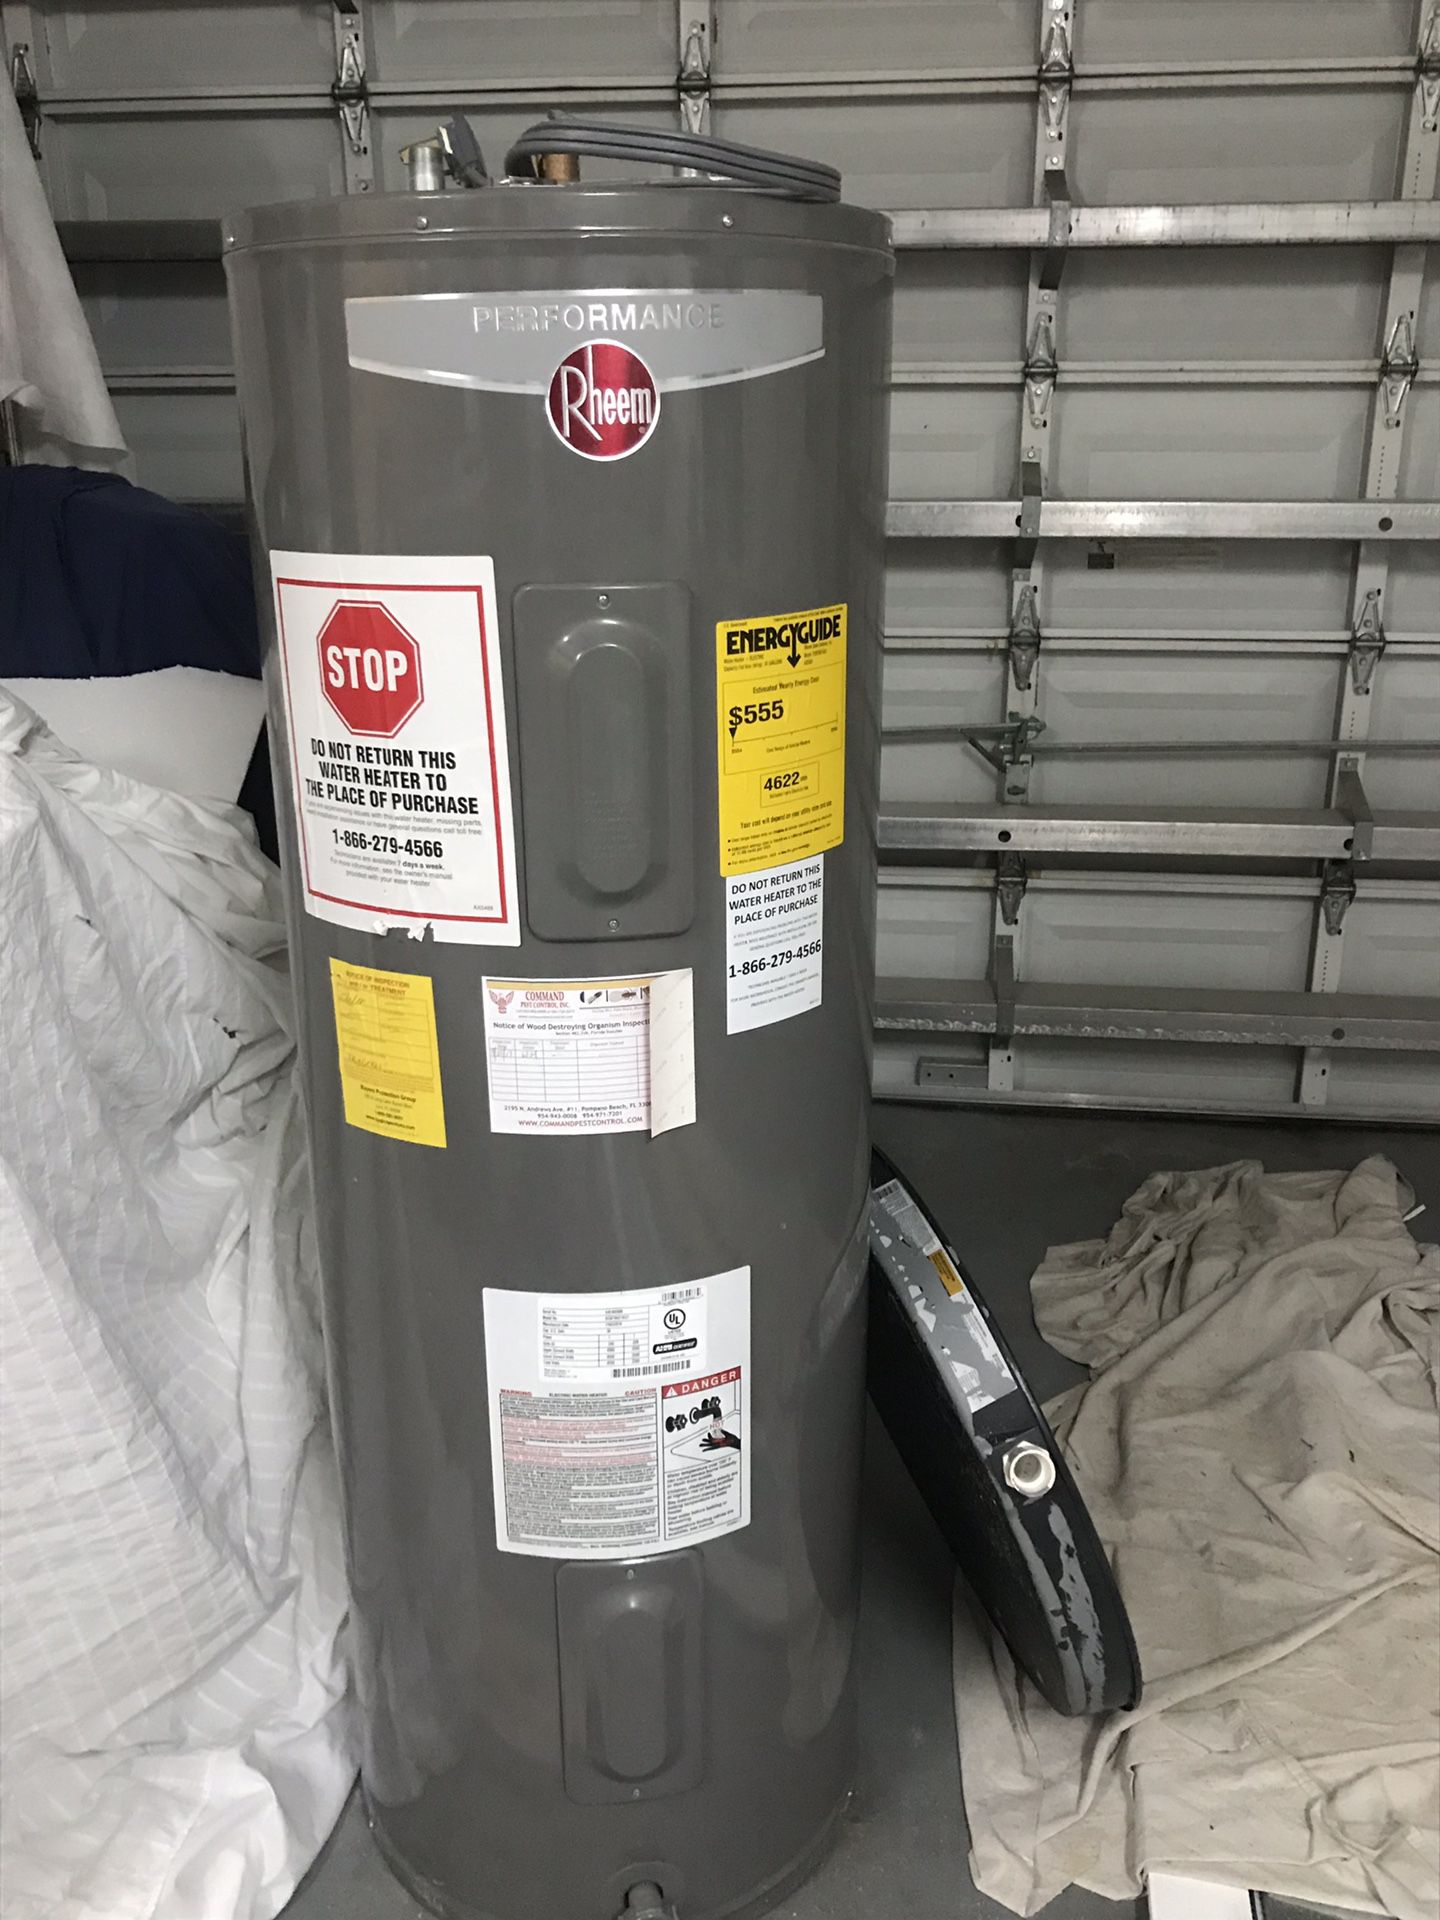 Rheem electric water heater. 50 gallon. 4500 Watts. Gently used. Approx 18 months old. Works great. 60” tall